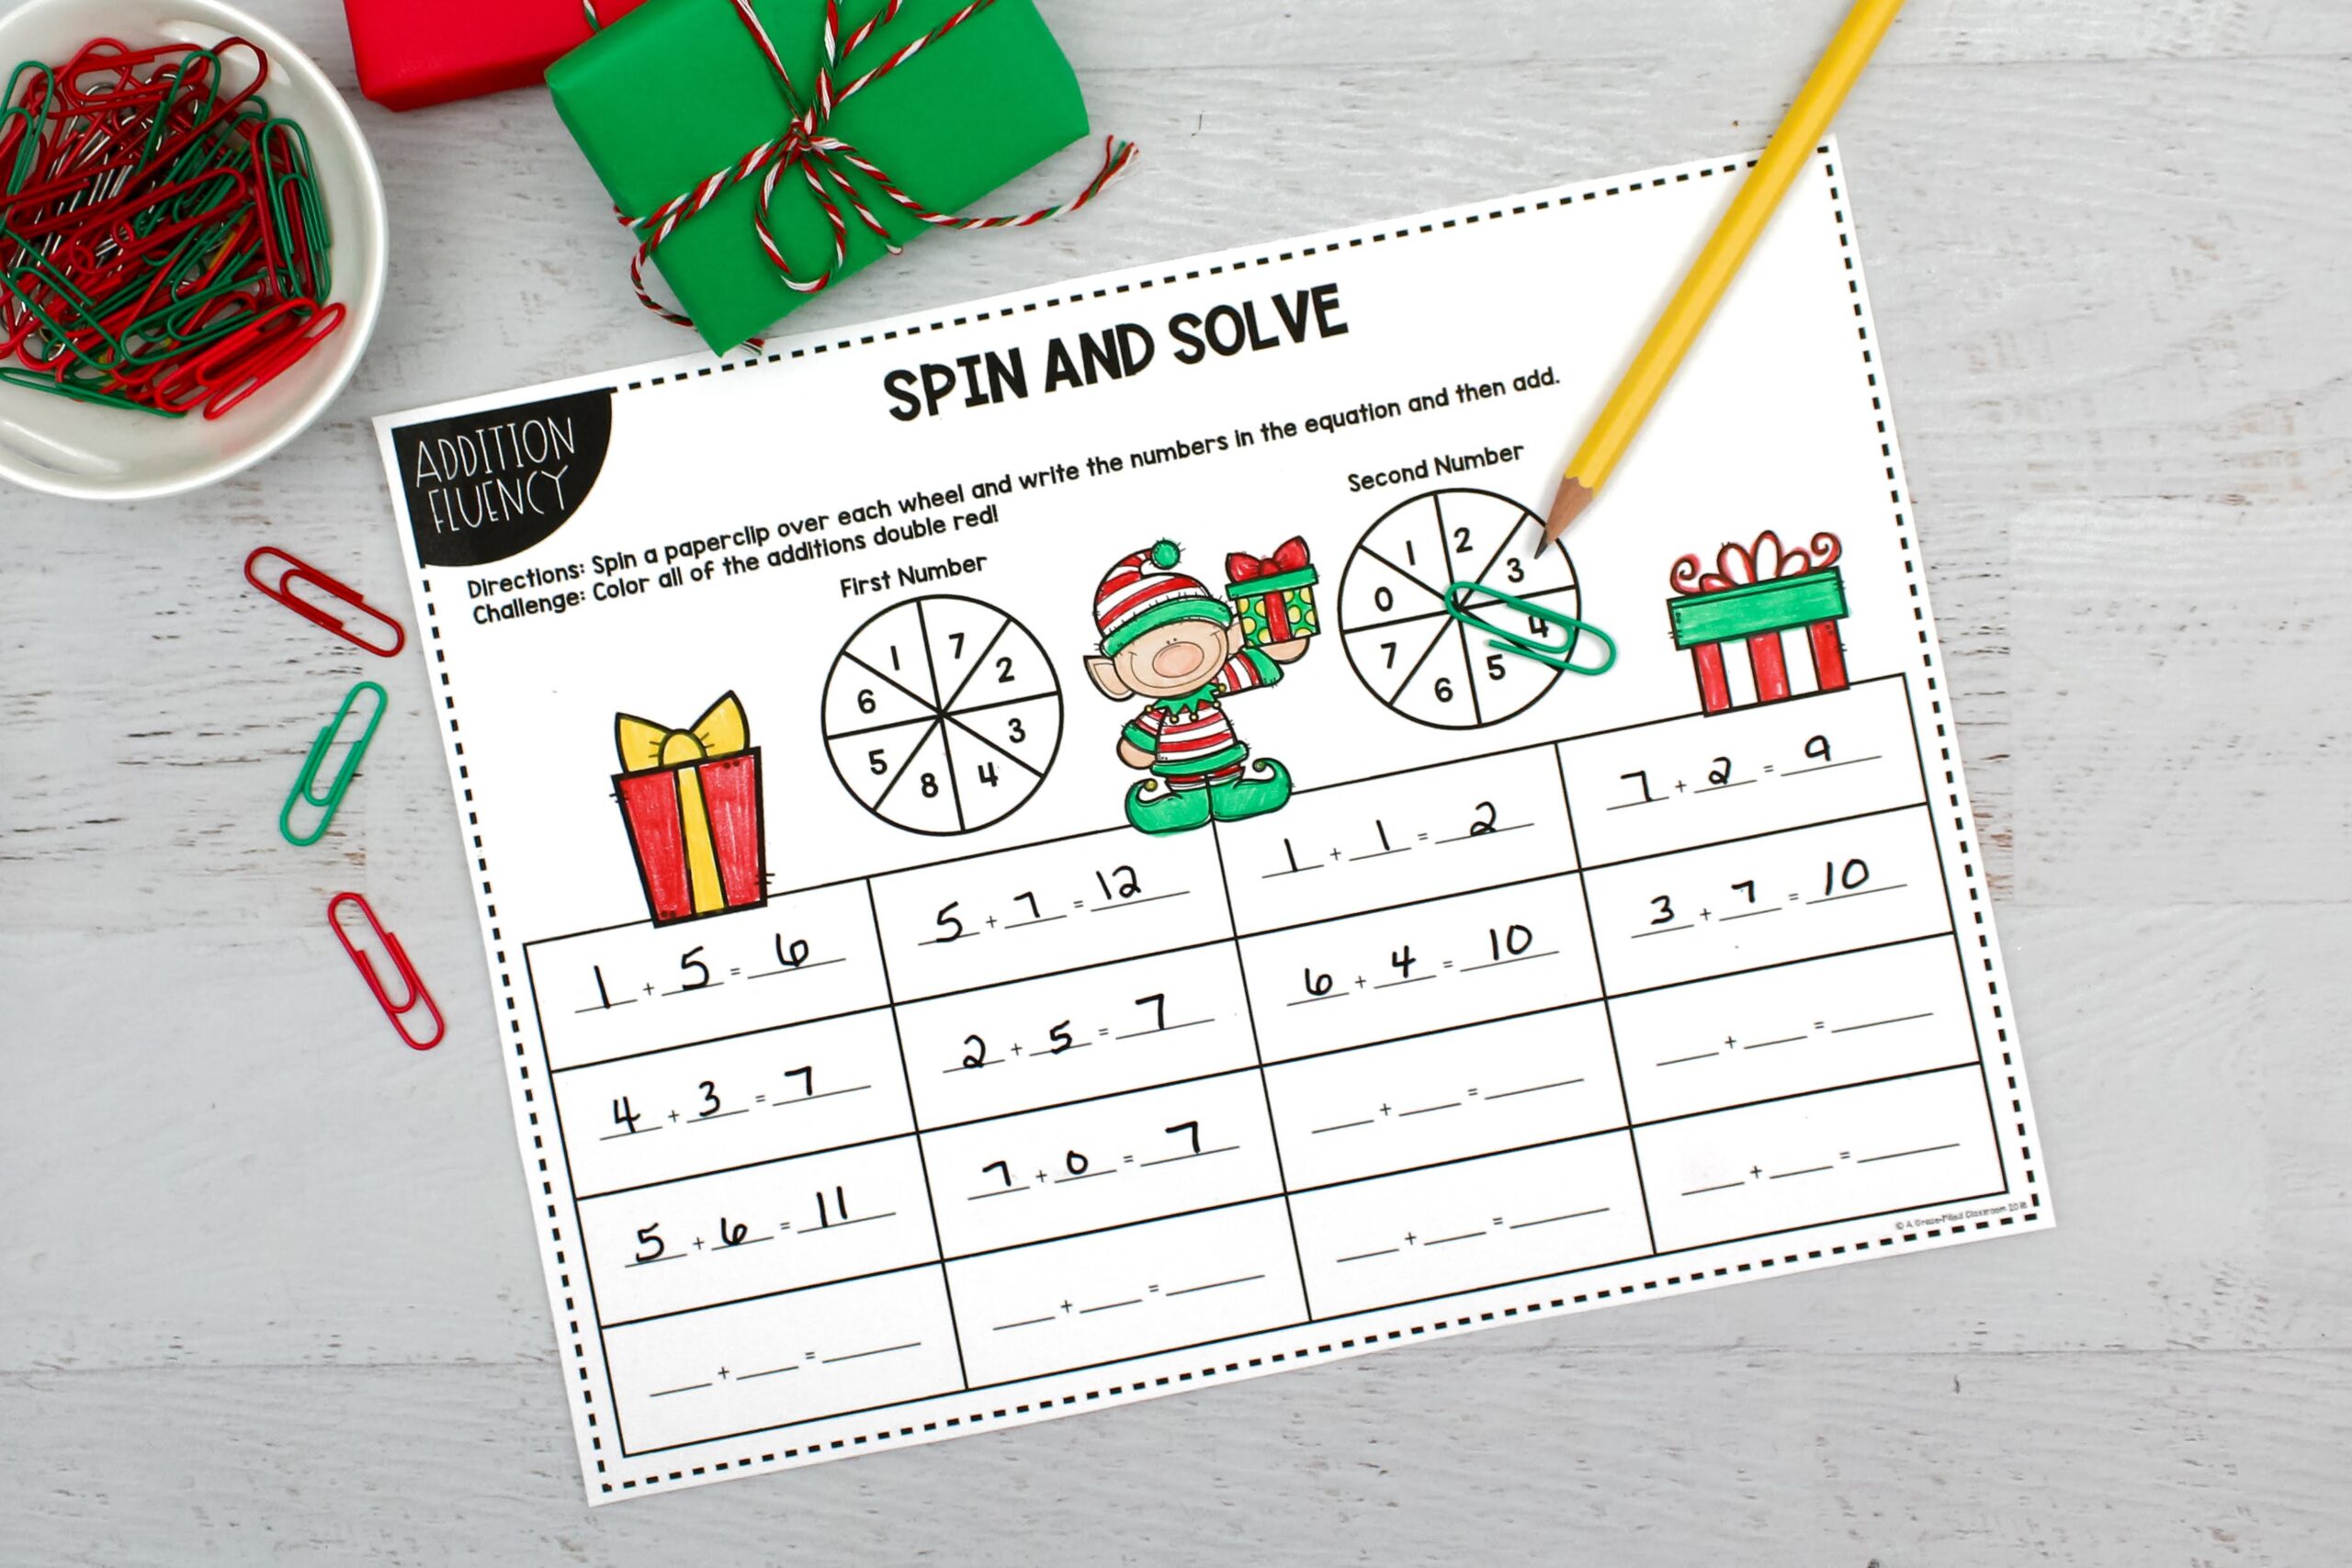 Spin and solve addition fact fluency activity